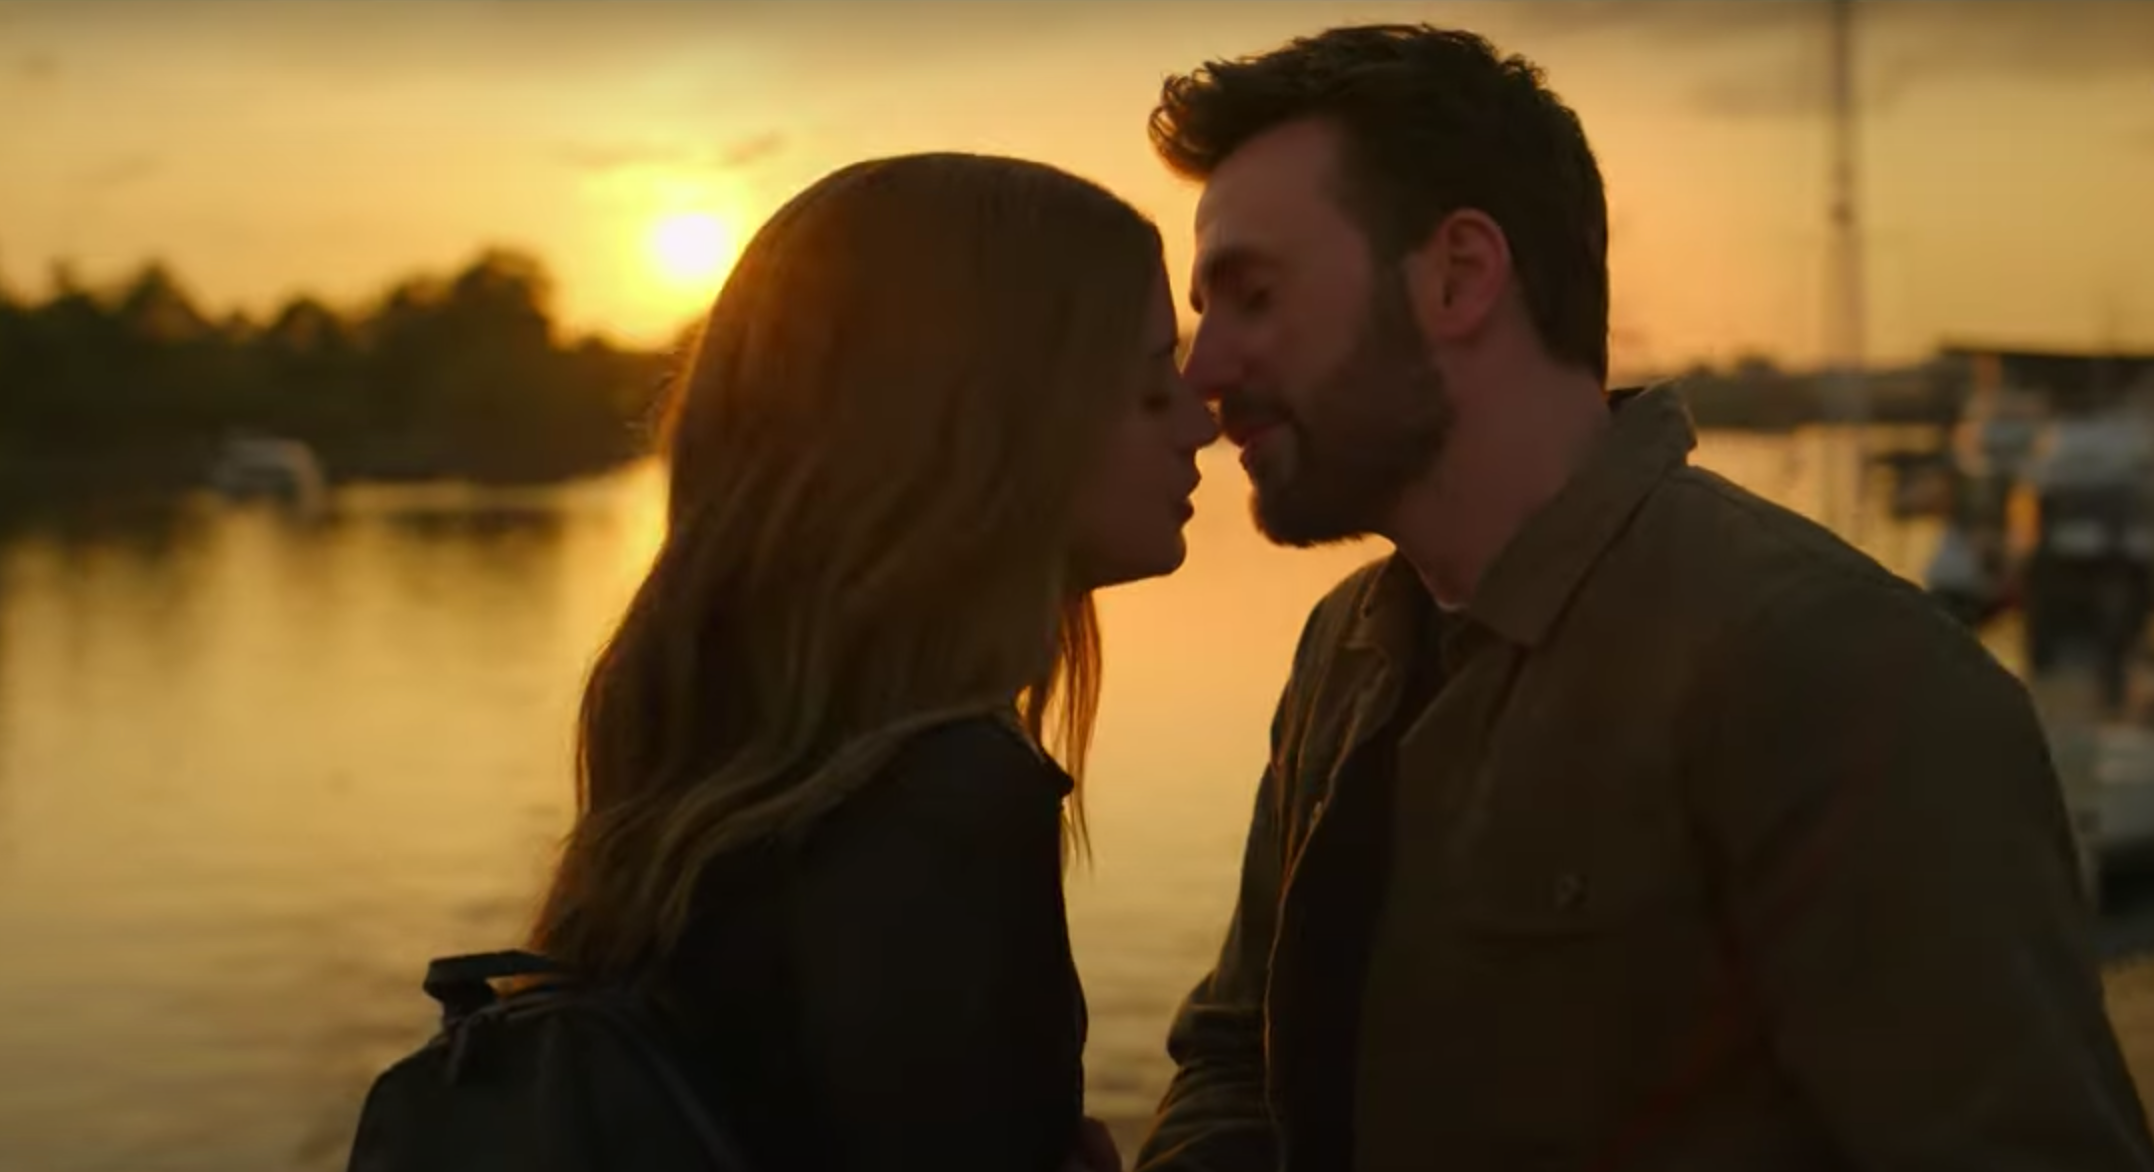 Chris Evans Has Returned to Rom-Coms And My Heart is Throbbing